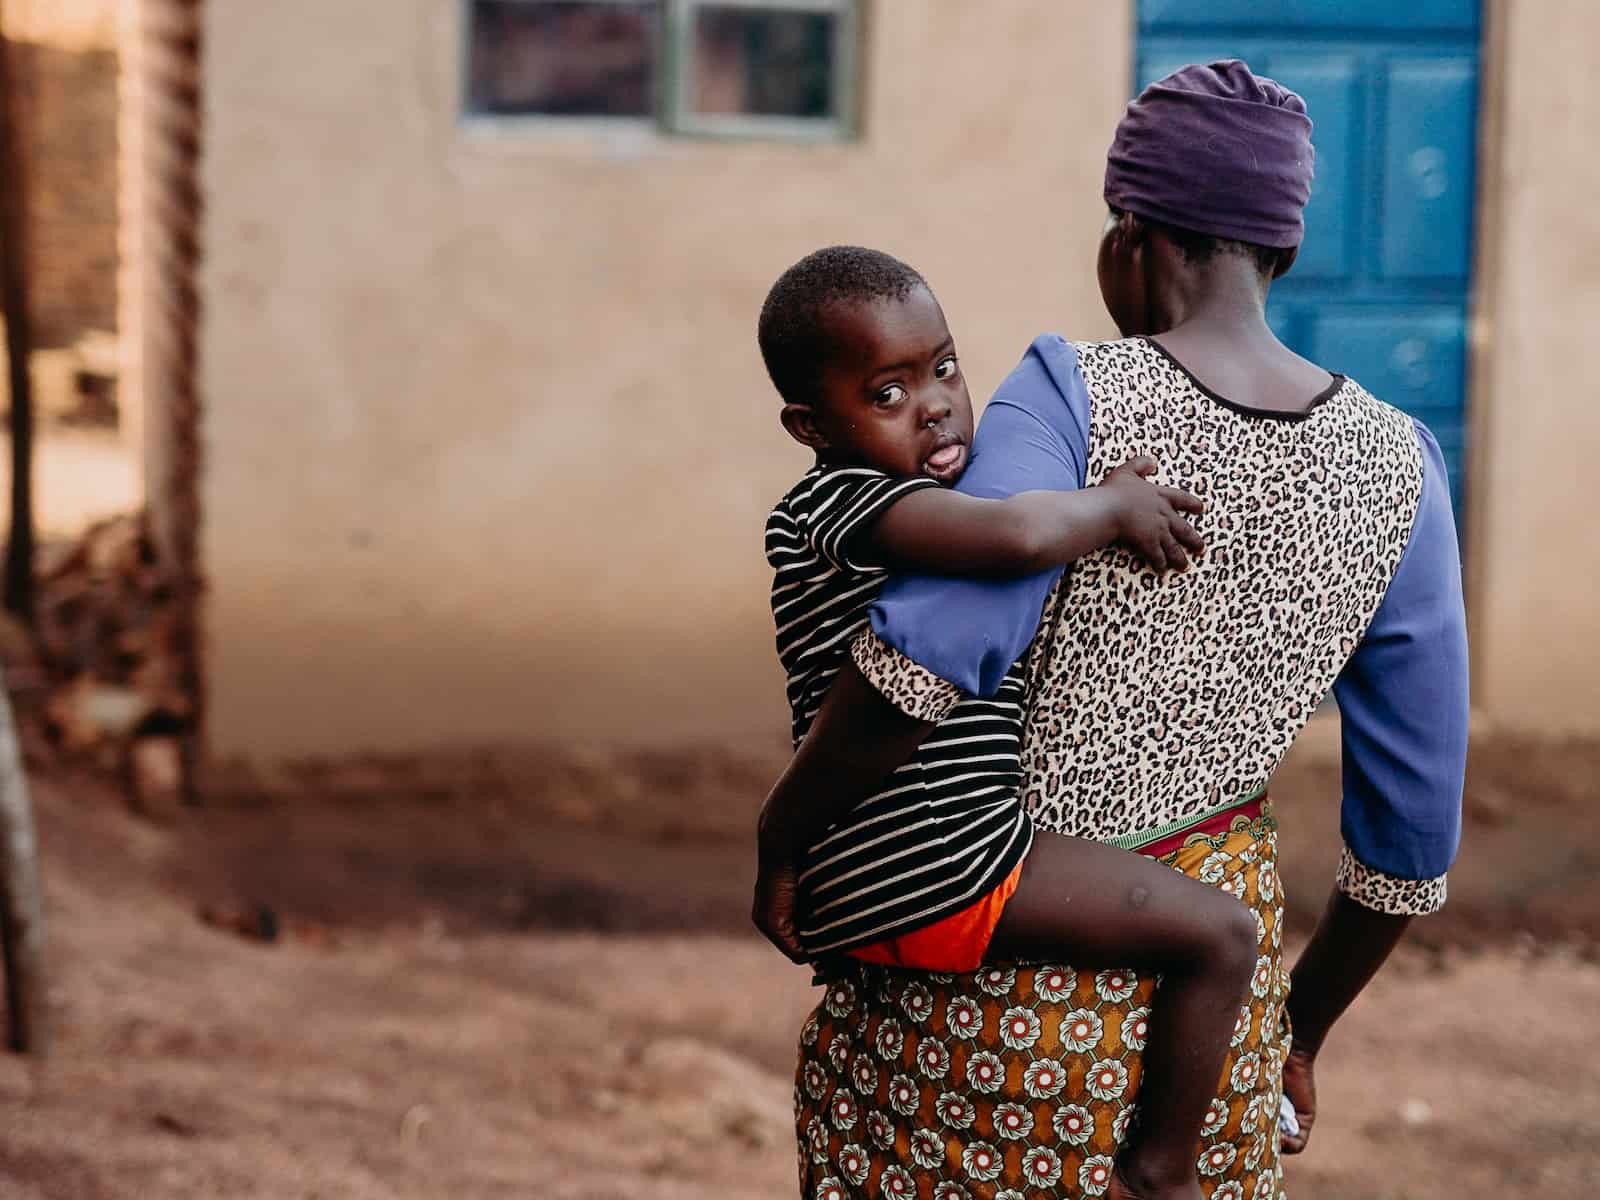 A woman walking towards a house holds a child in her arms.